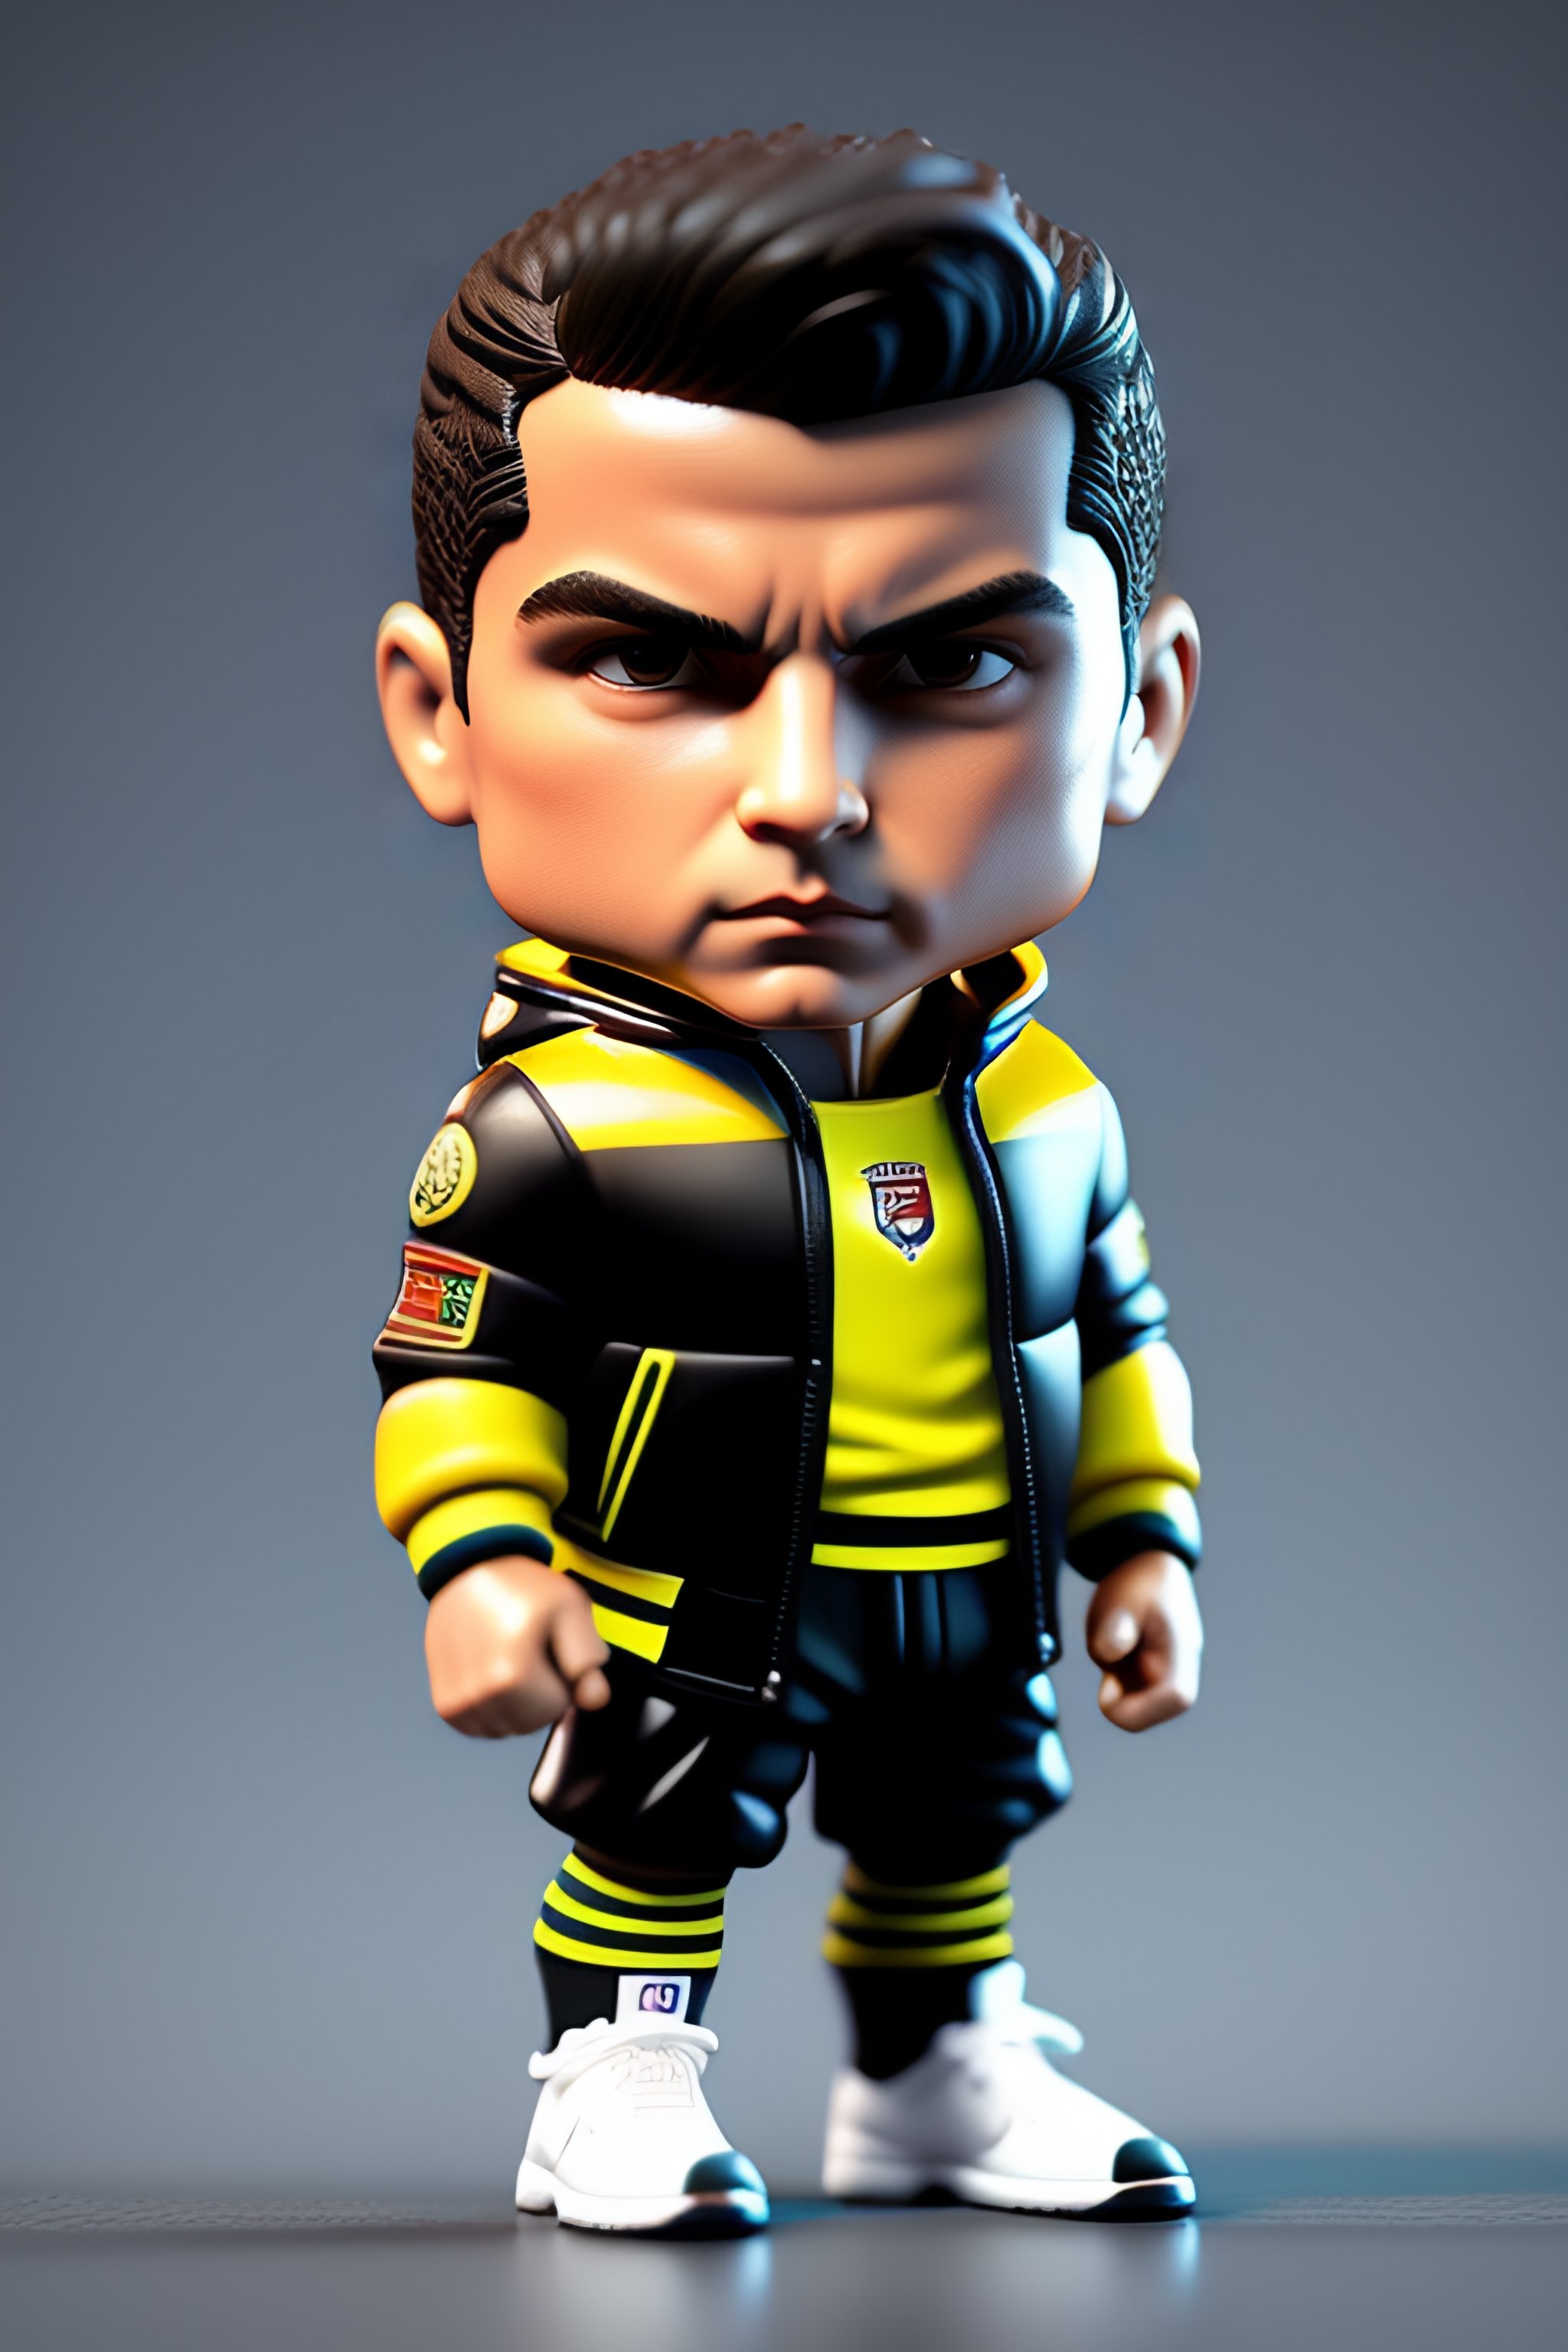 Lexica - Cristiano Ronaldo brutal character in the jacket, 3d render ...